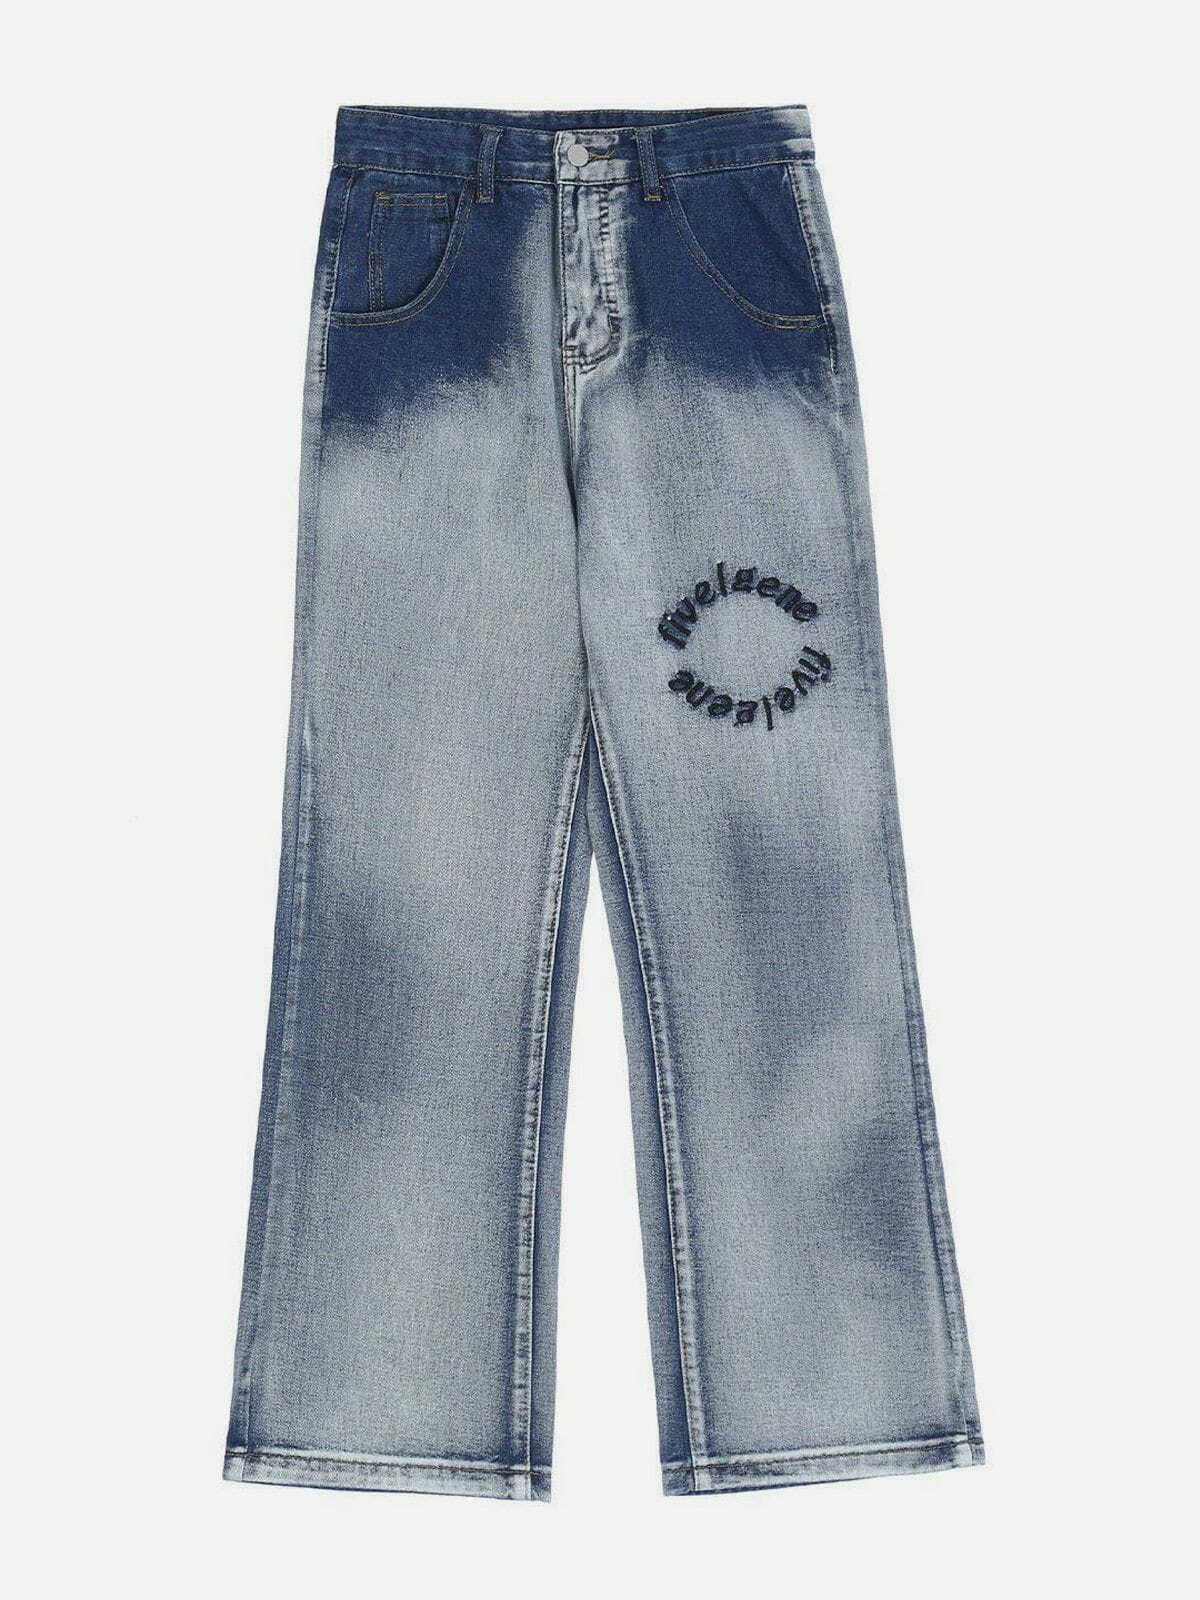 gradient embroidered jeans edgy & vibrant streetwear 3931